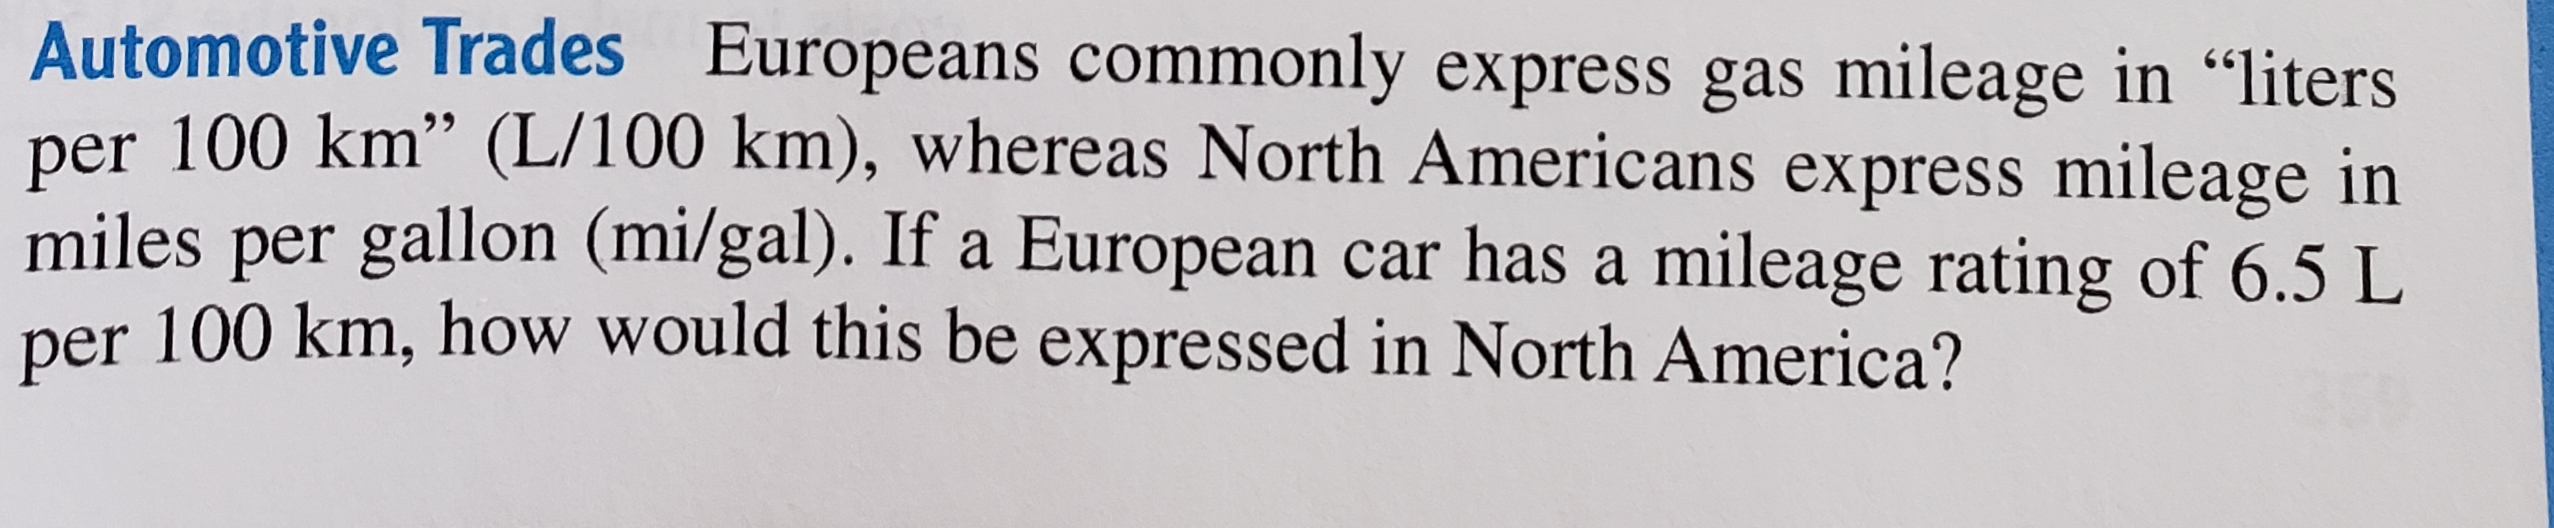 Automotive Trades Europeans commonly express gas mileage in “liters
per 100 km" (L/100 km), whereas North Americans express mileage in
miles per gallon (mi/gal). If a European car has a mileage rating of 6.5 L
per 100 km, how would this be expressed in North America?
